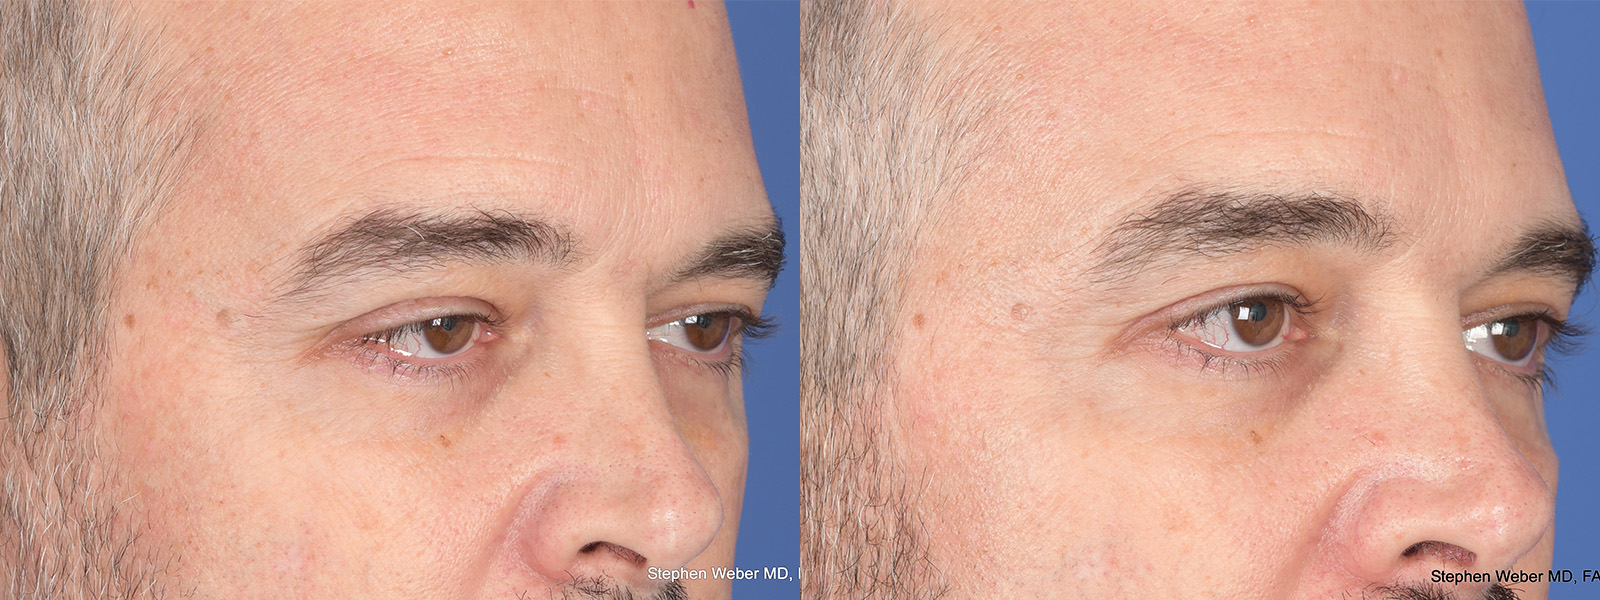 Blepharoplasty Before and After | Weber Facial Plastic Surgery